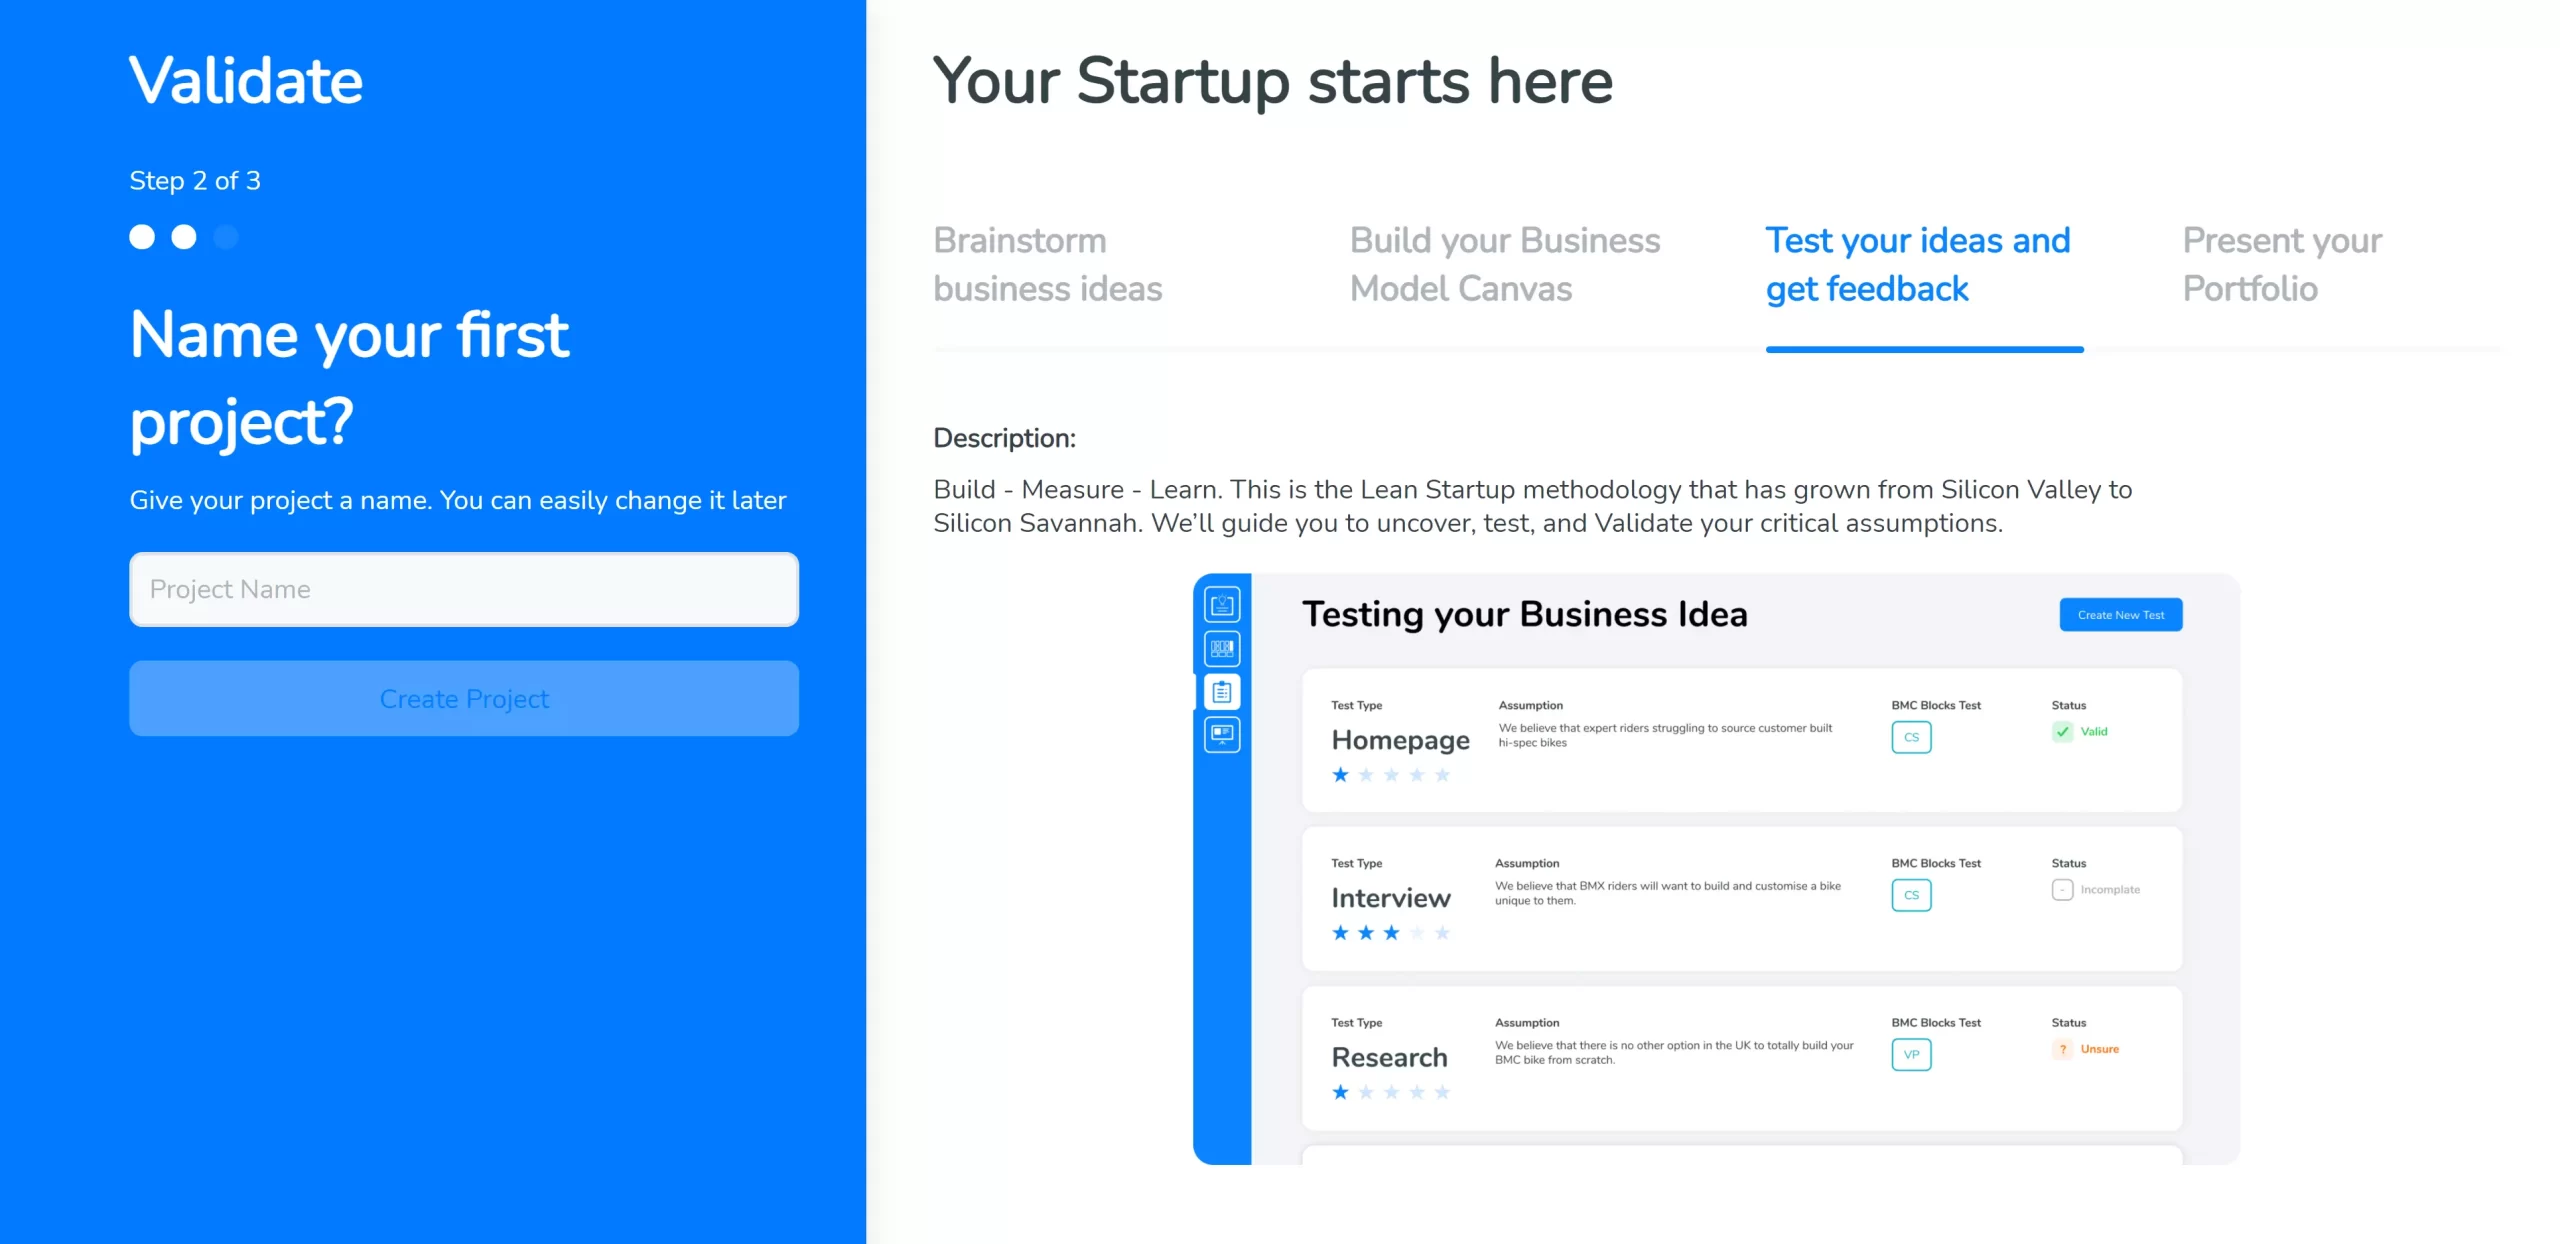 Your Startup starts here. Name your first business idea on SimVenture Validate.